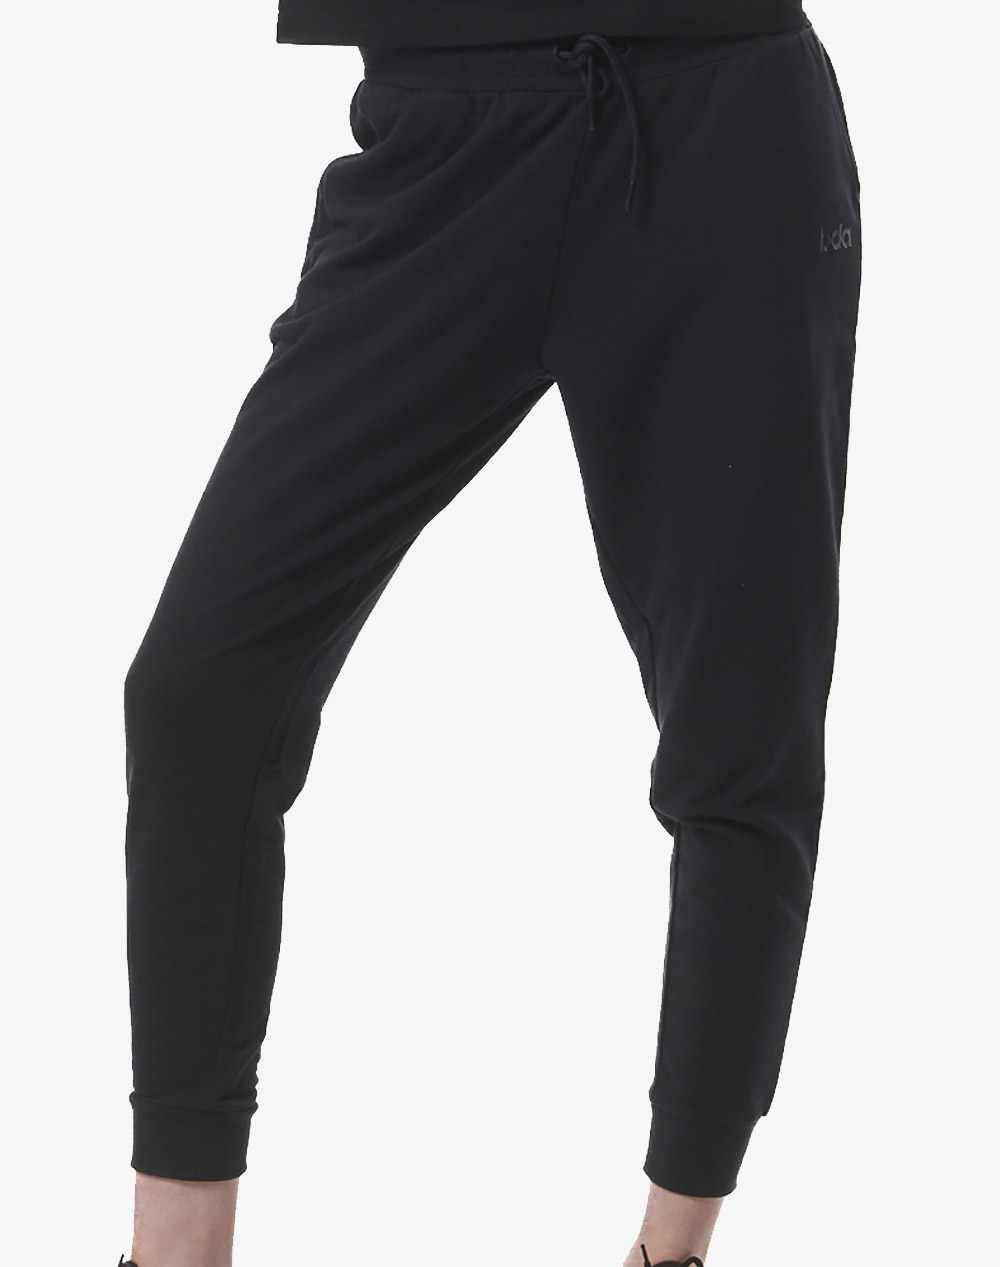 BODY ACTION WOMENS ESSENTIAL SPORT JOGGERS